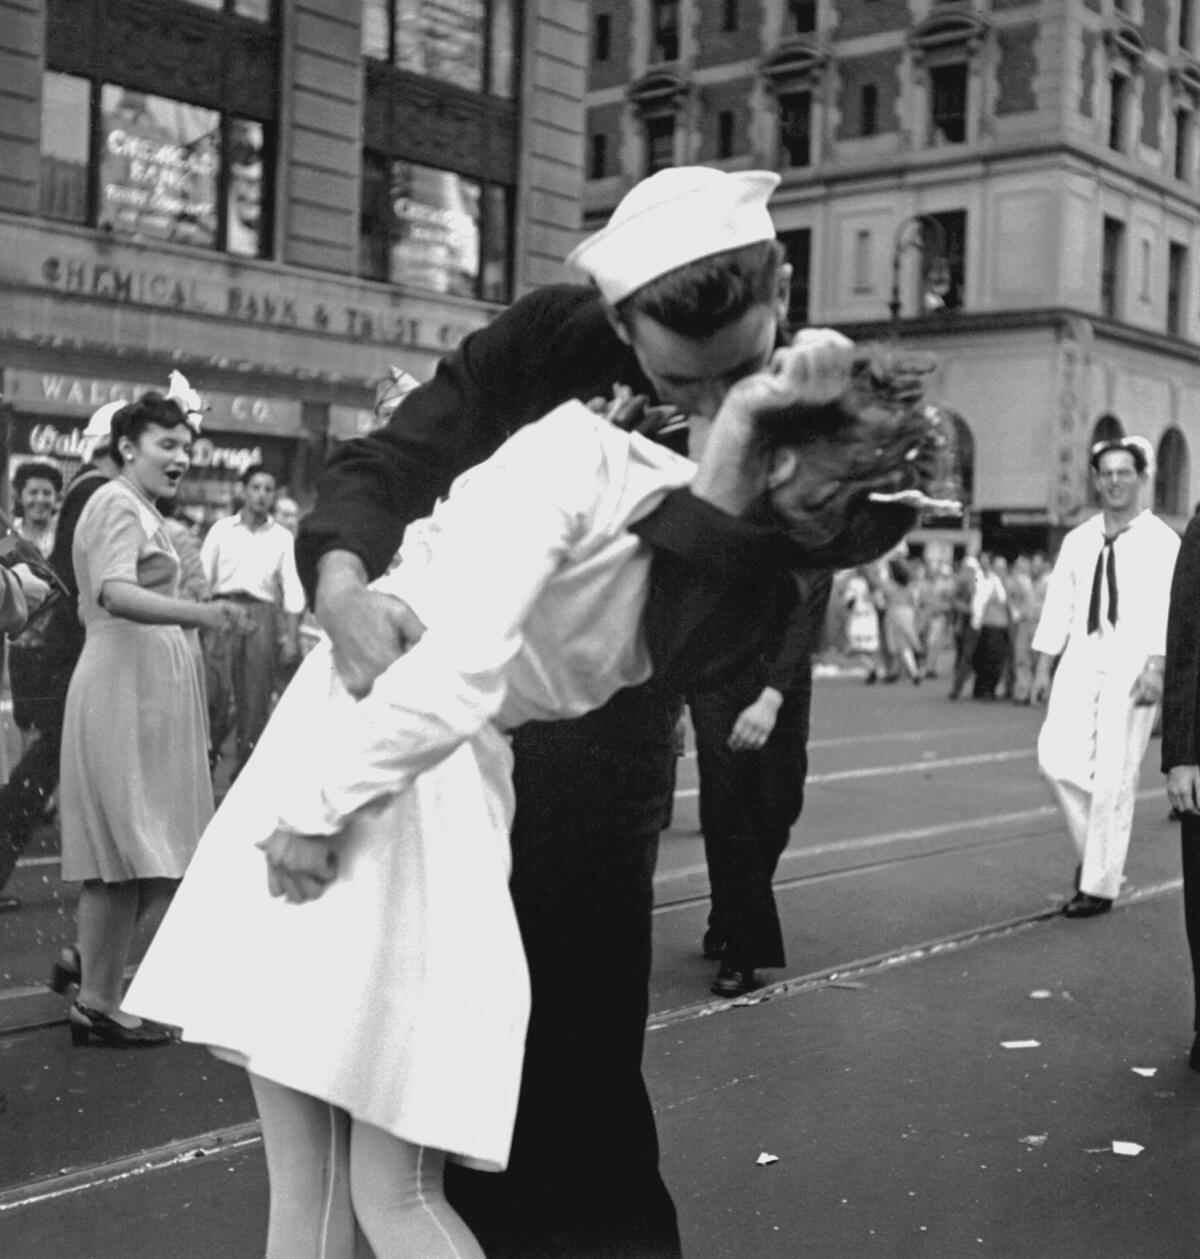 The famous kiss, captured from a slightly different angle. This one includes nurse Gloria Bullard in the background. Her recounting of the afternoon helped Don Olson and his colleagues determine that the kiss occurred at 5:51 p.m. on Aug. 14, 1945.